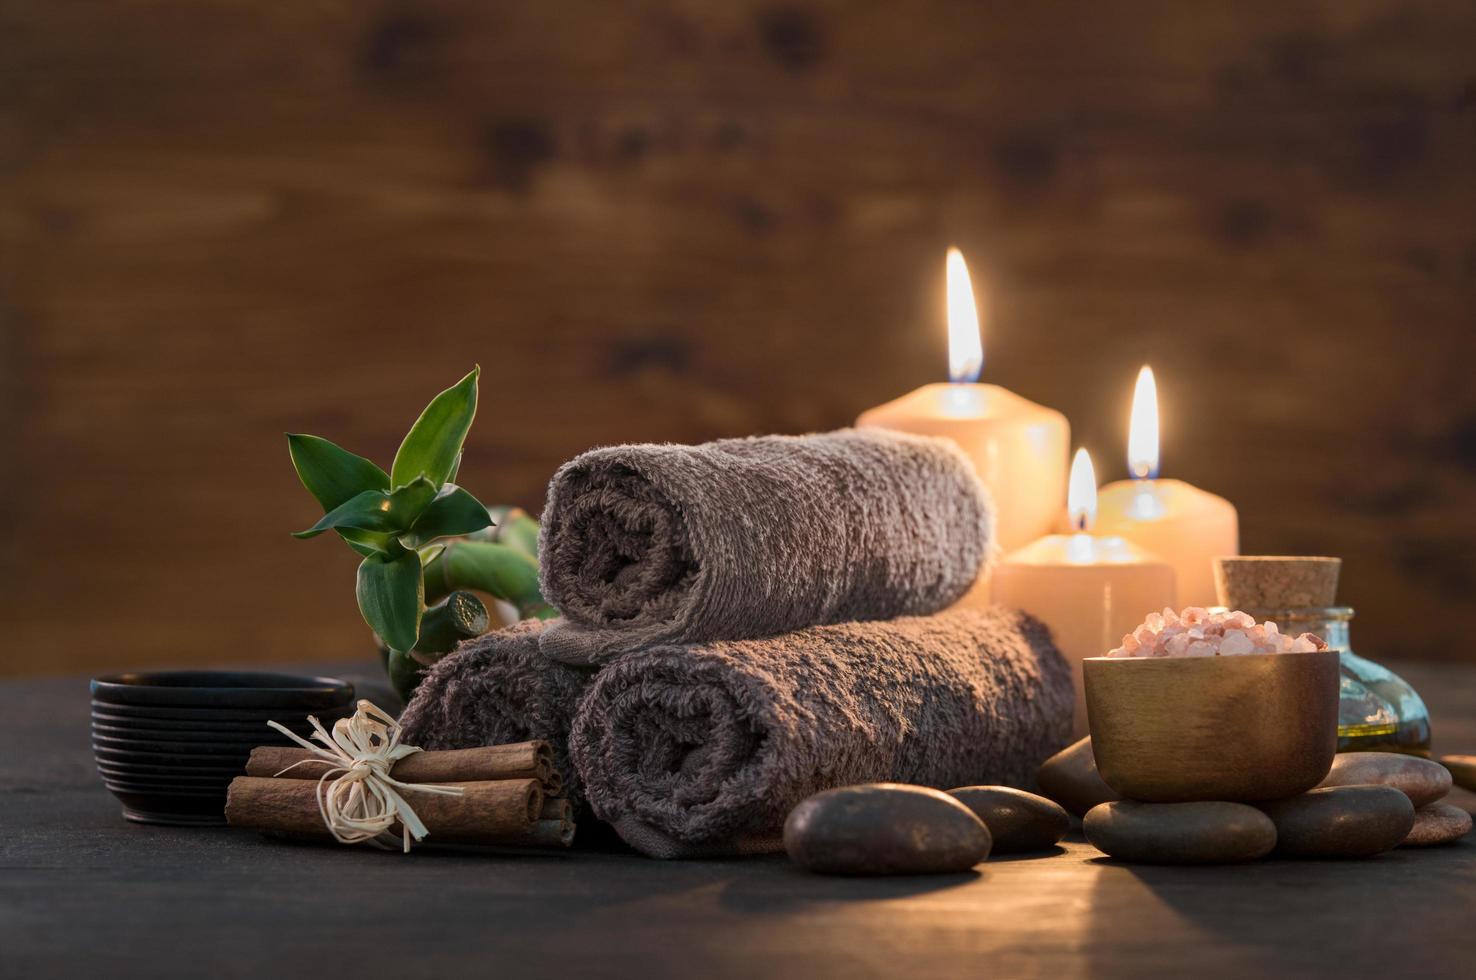 Beauty spa treatment with candles photo